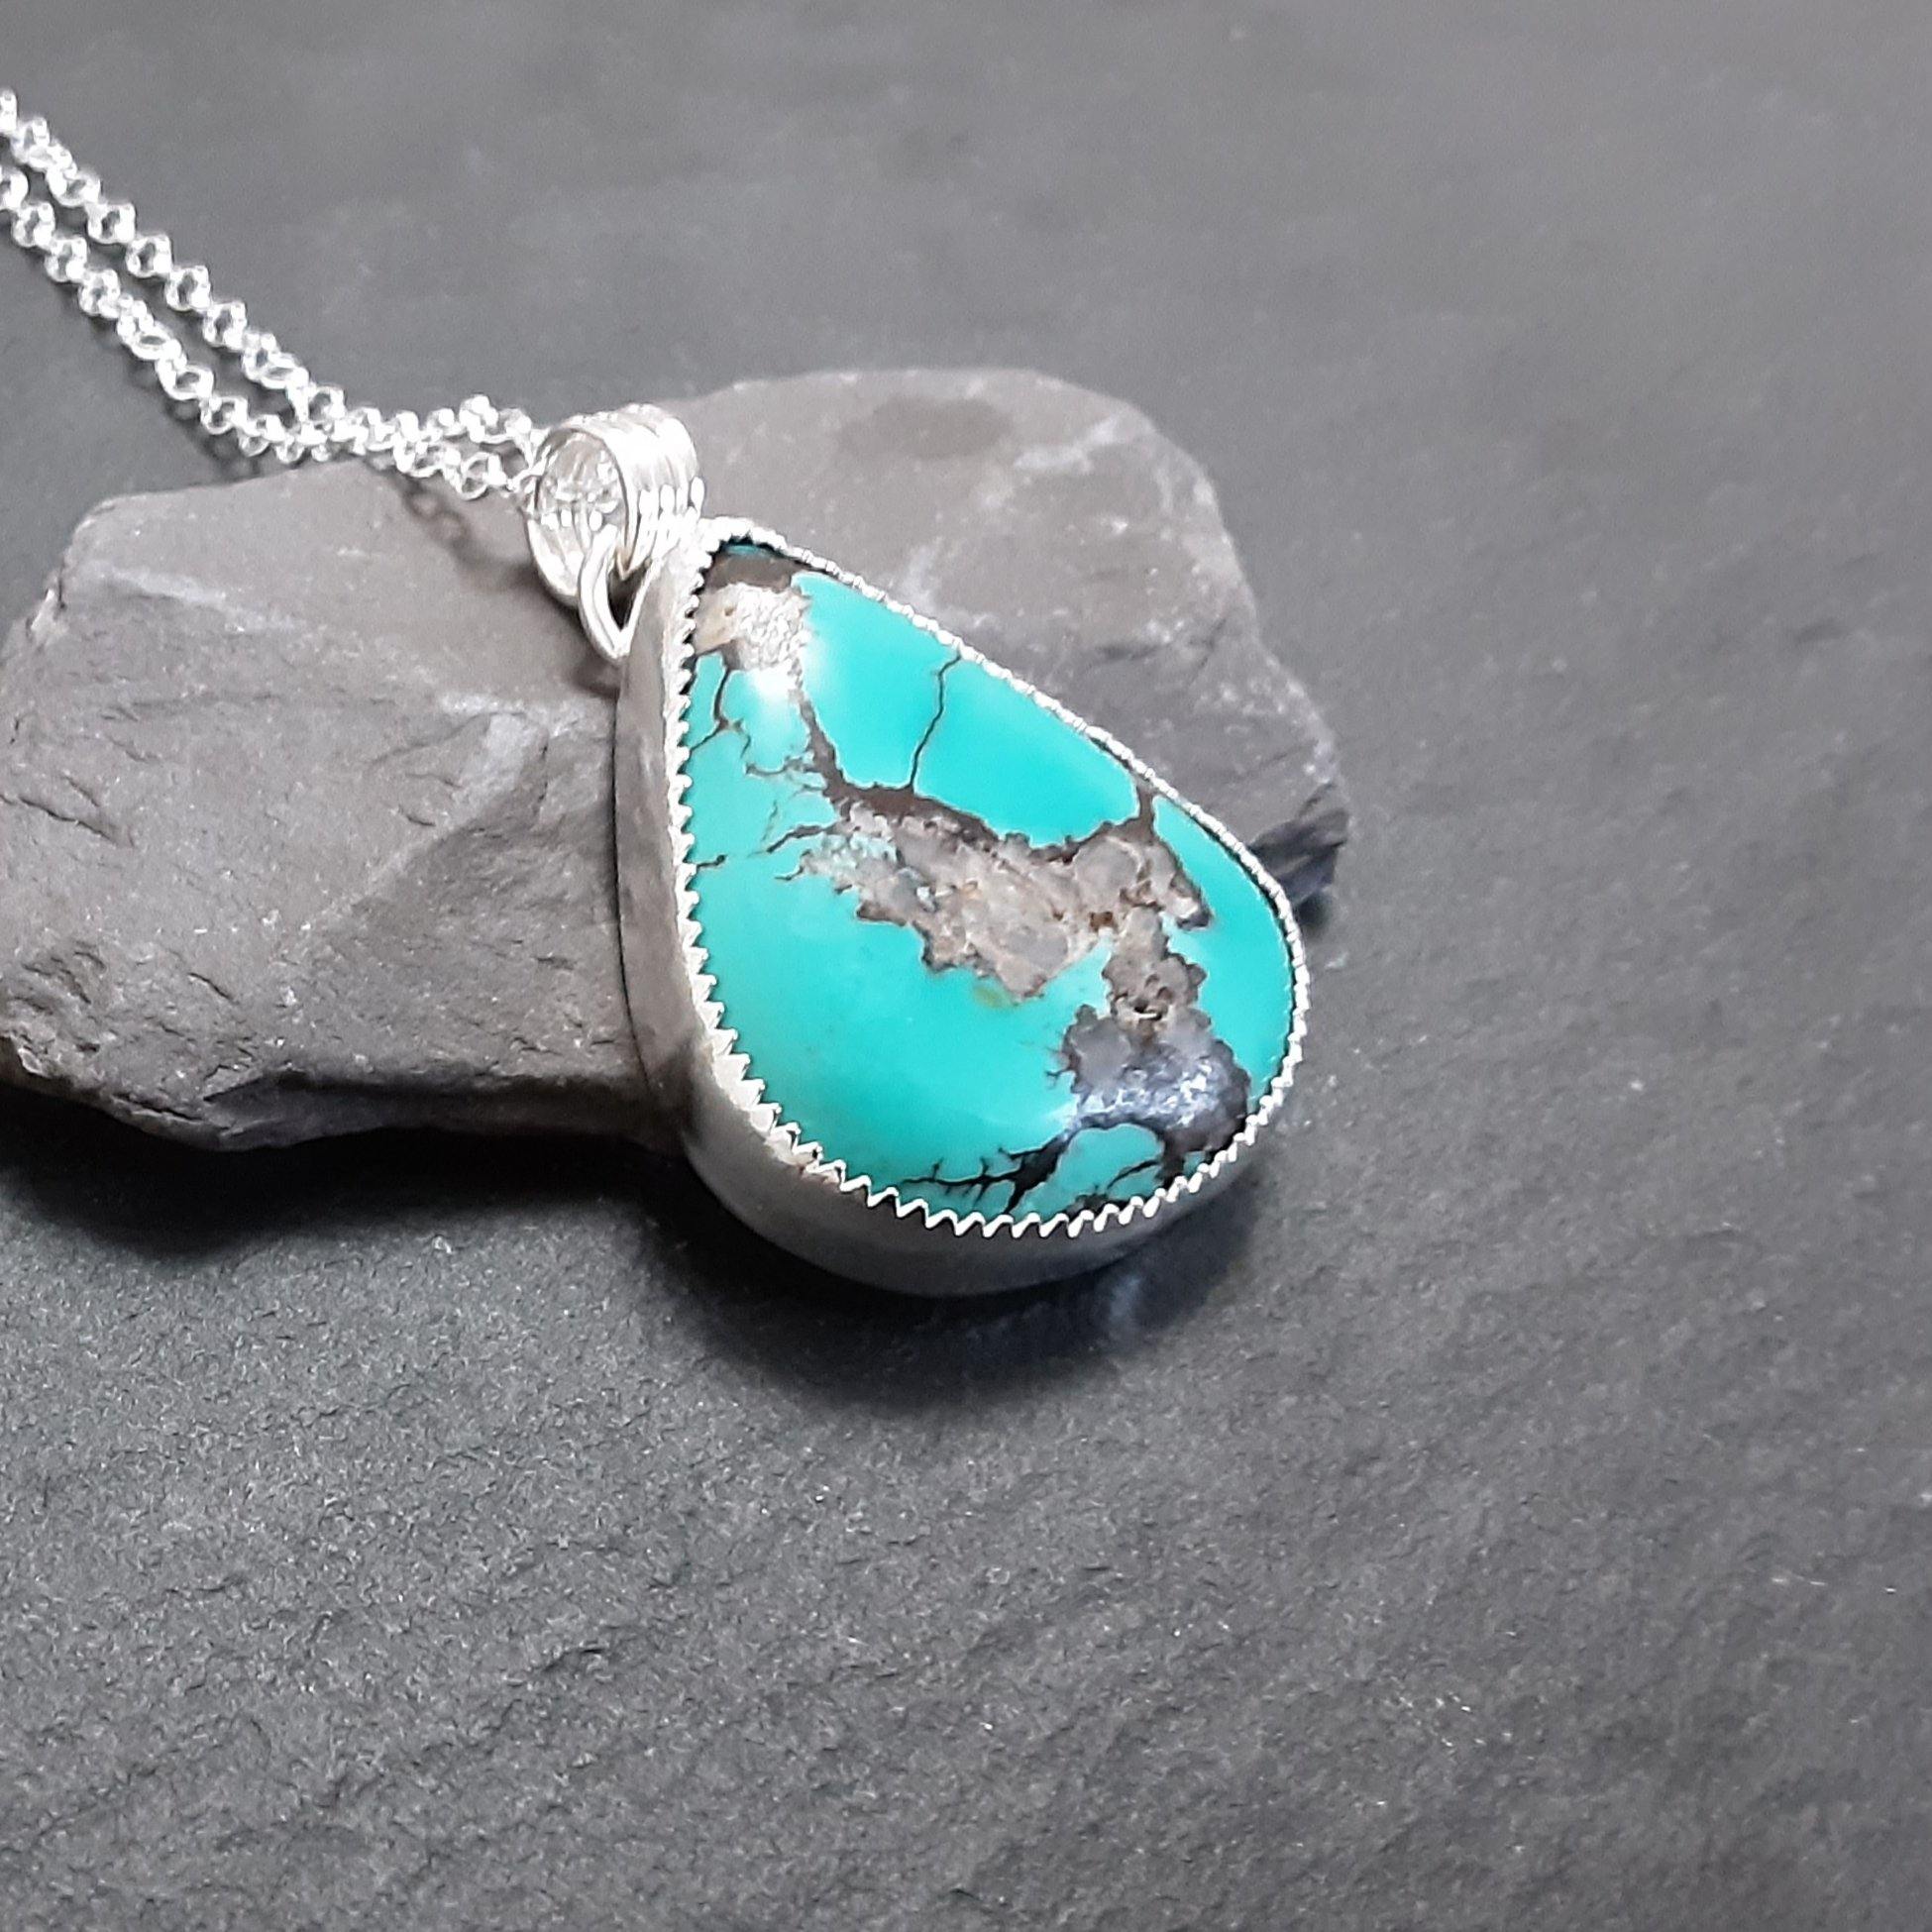 Royston turquoise and sterling silver pendant. - PurplePixiebyDenise